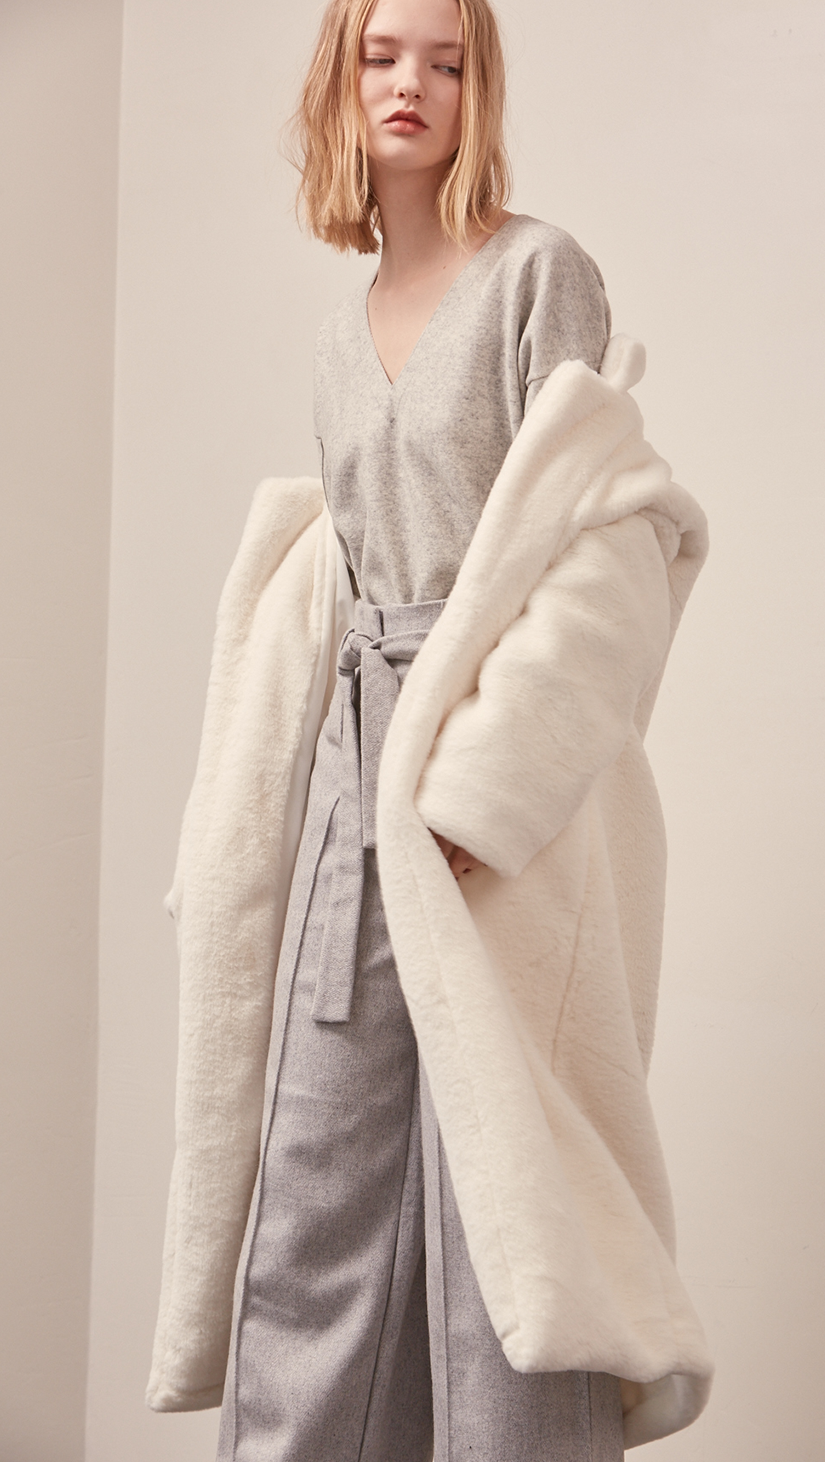 Stelen Shearling Coat in white. Super soft, notched collar, dropped shoulder, long sleeve. Open front. Fully lined. Relaxed silhouette.